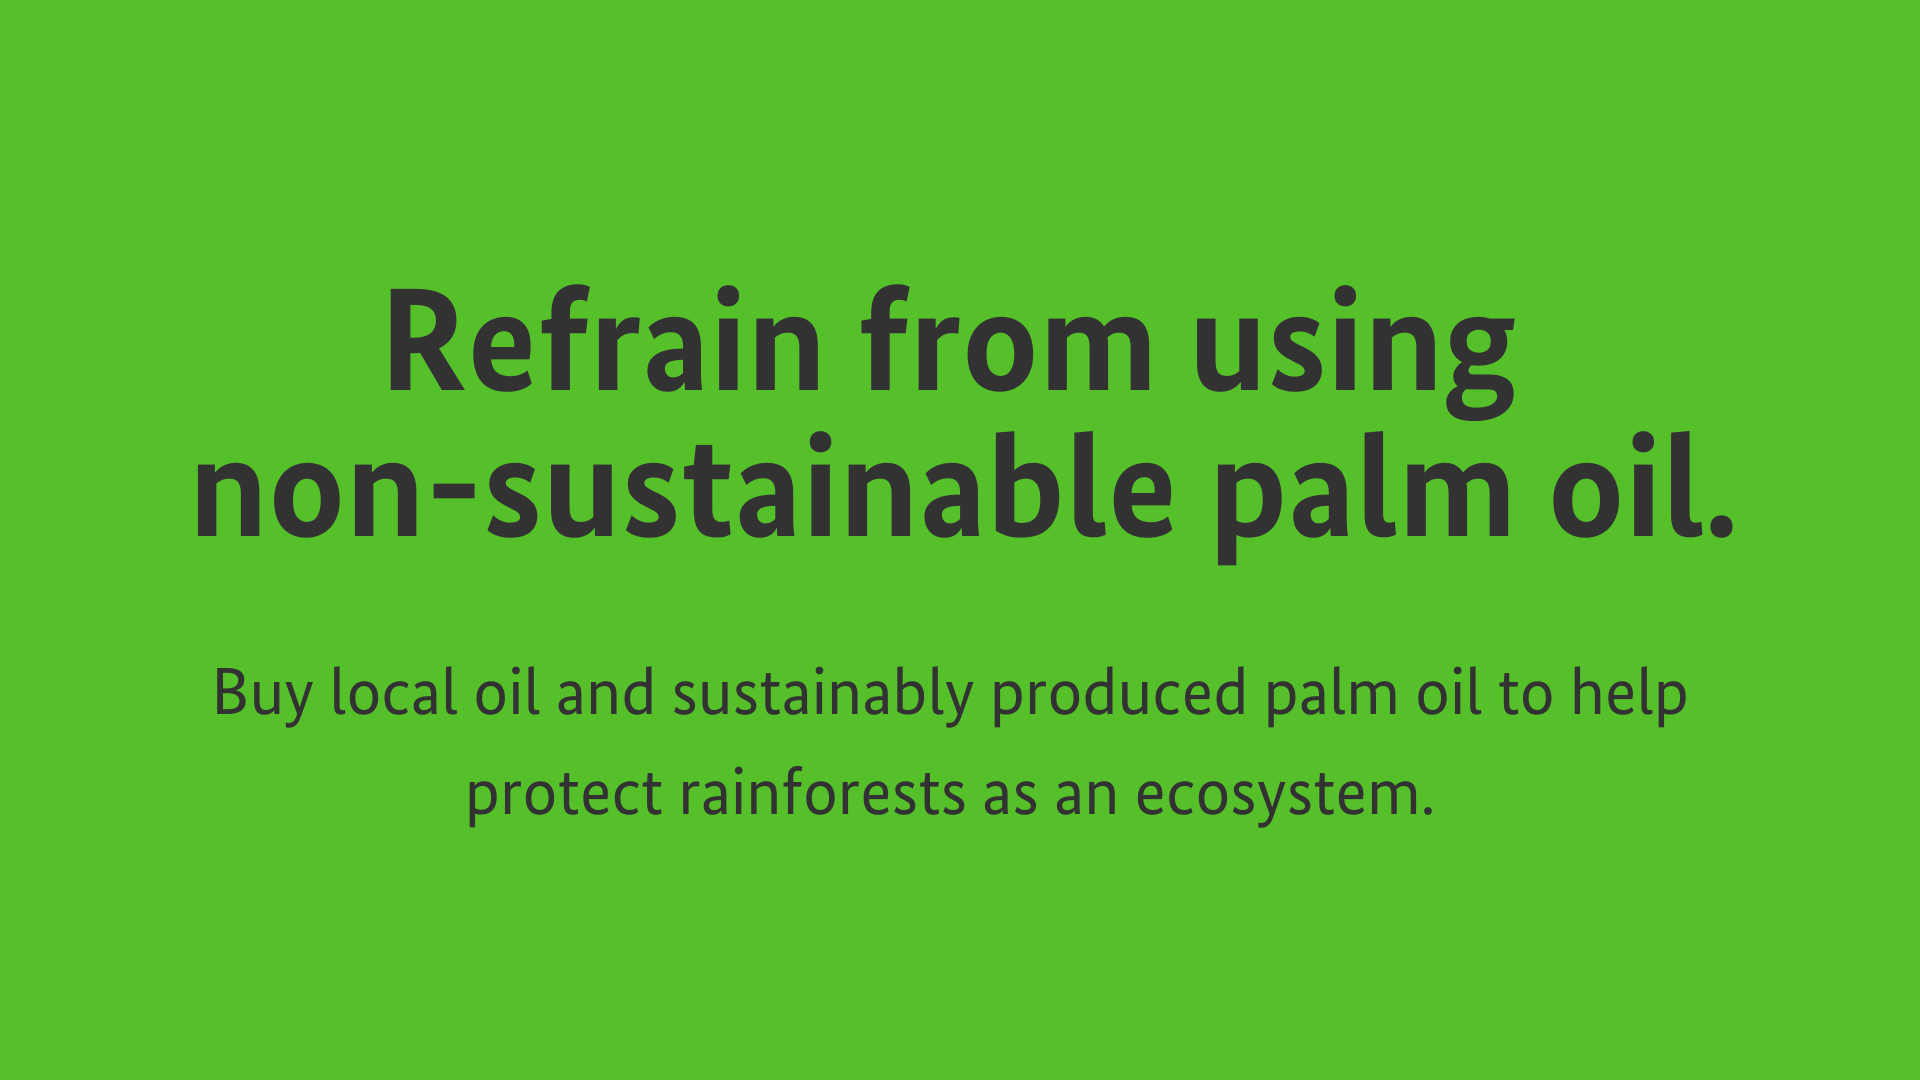 Refrain from using non-sustainable palm oil. Buy local oil and sustainably produced palm oil to help protect rainforests as an ecosystem.